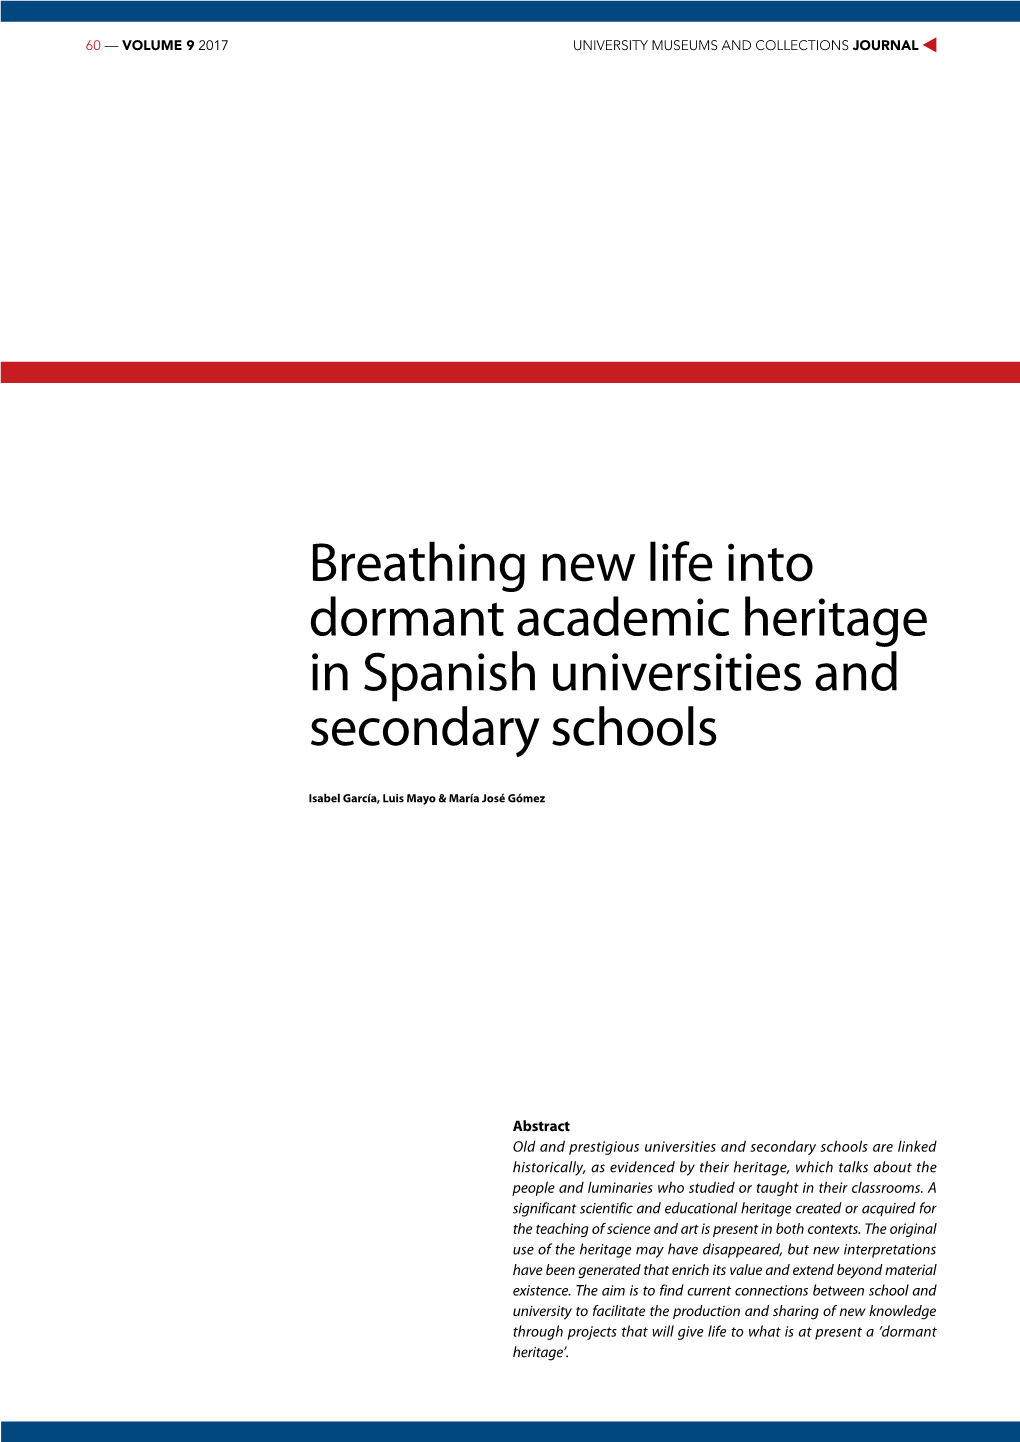 Breathing New Life Into Dormant Academic Heritage in Spanish Universities and Secondary Schools